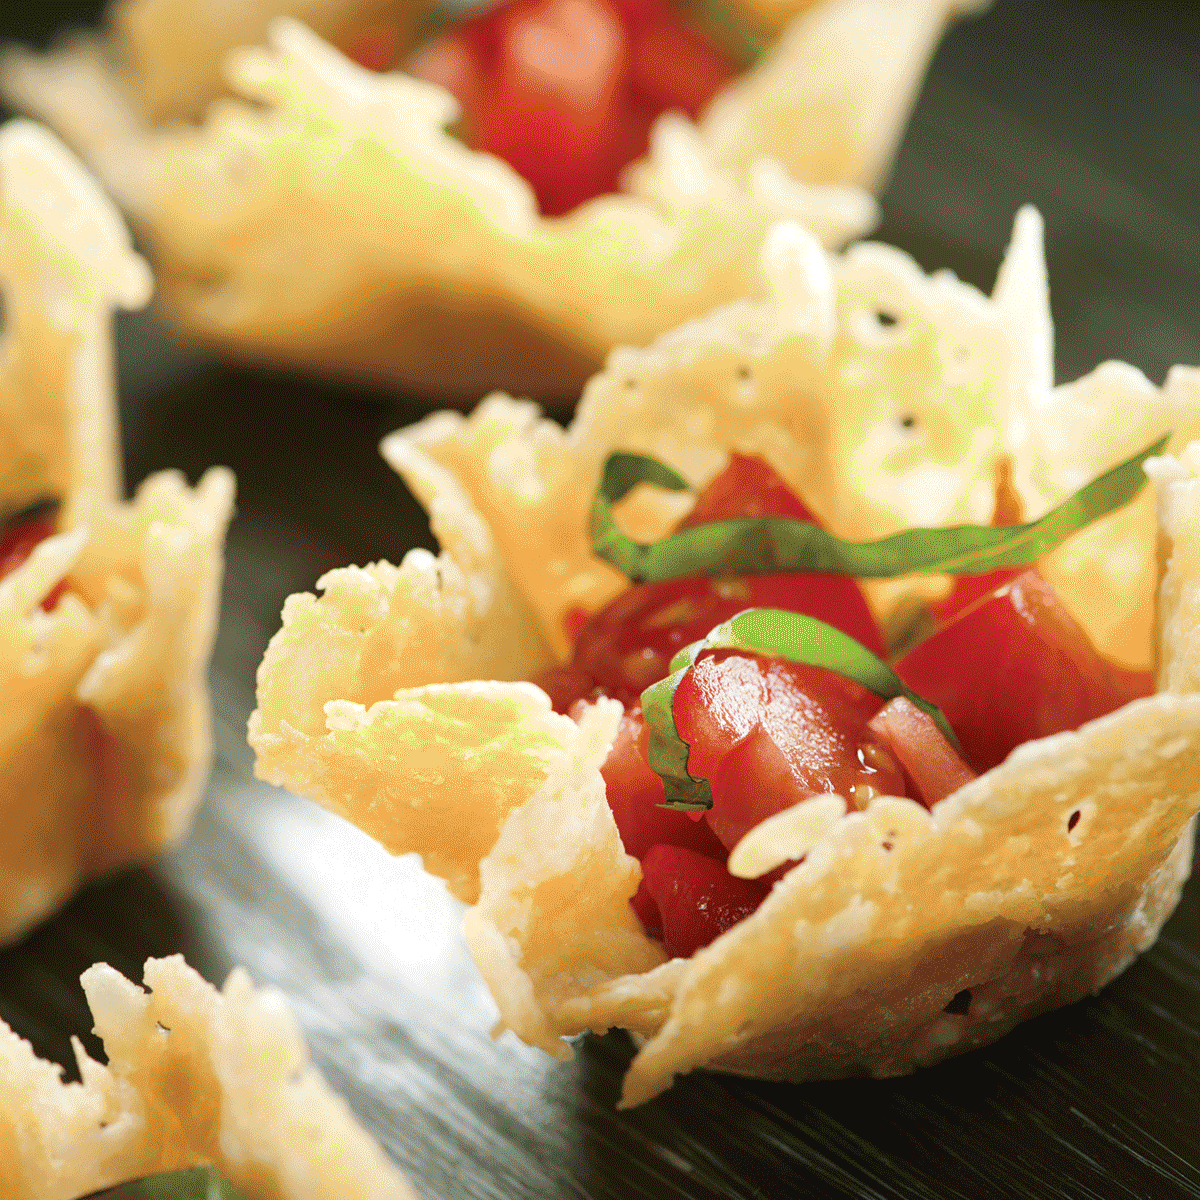 parmesan crisps (or tuiles) with roasted red pepper salad